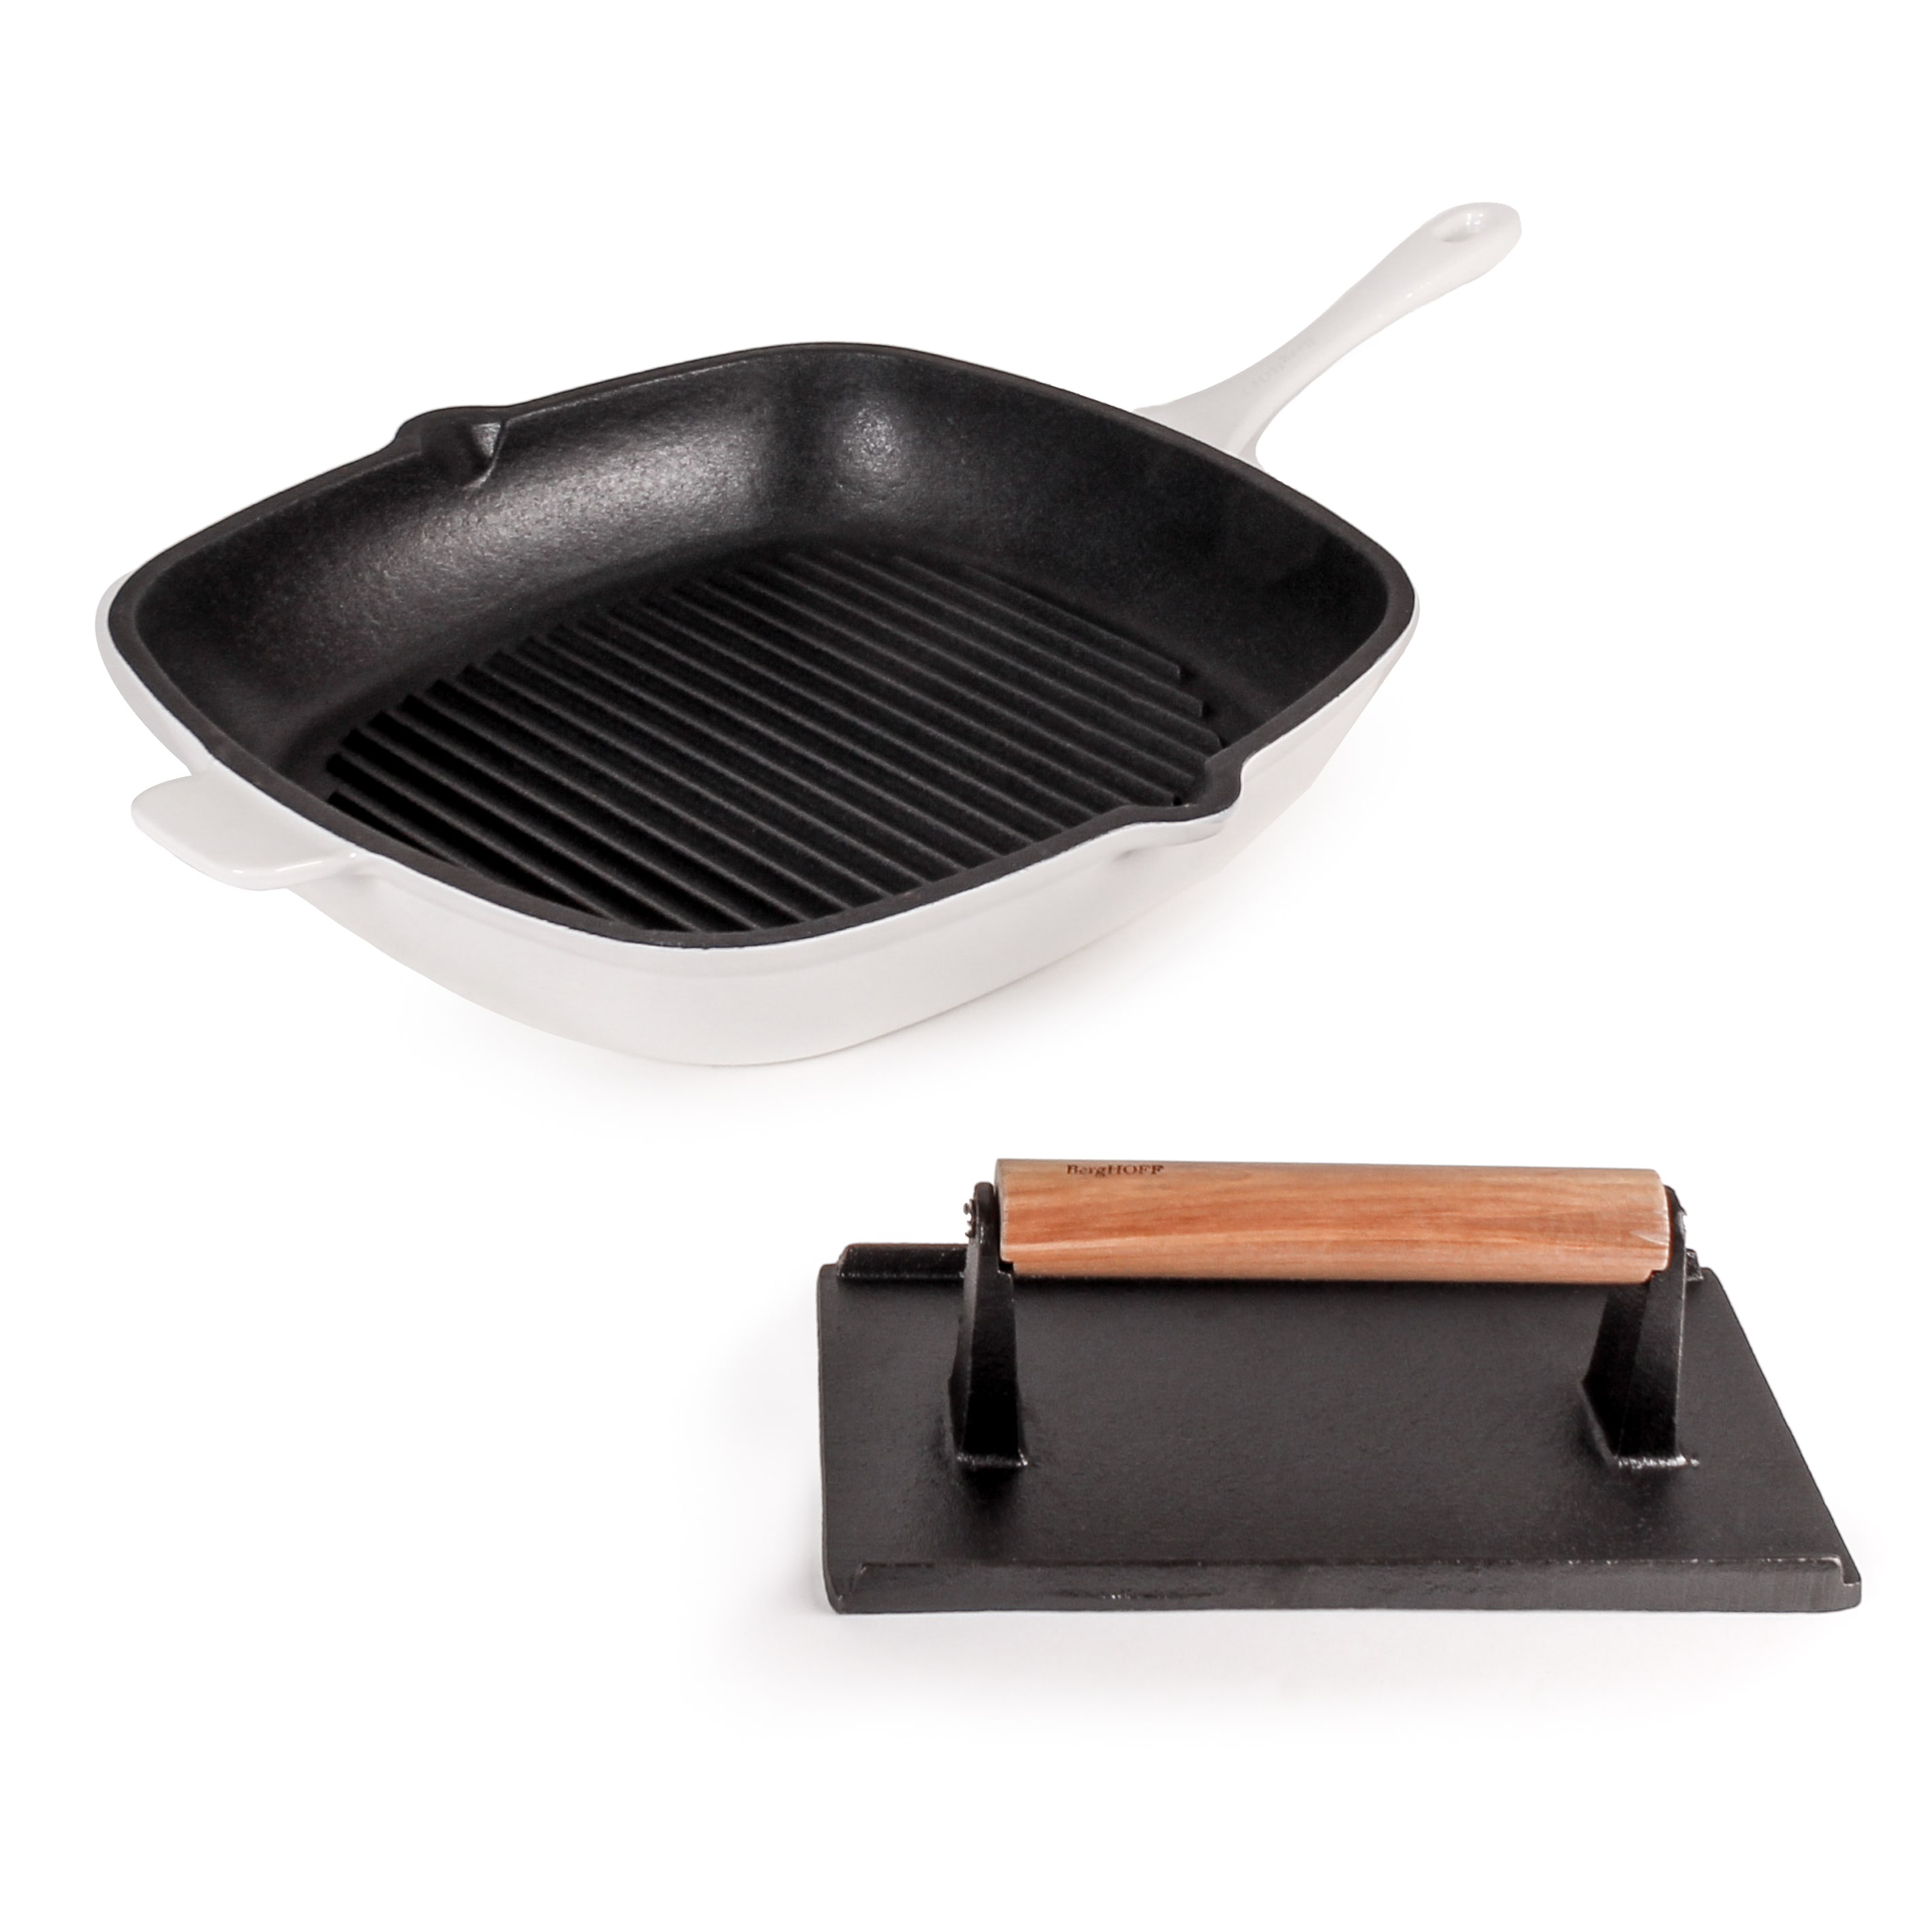 https://ak1.ostkcdn.com/images/products/is/images/direct/16e6e2f9b207a5f9e313ada17e1e5a891ede4009/Neo-2pc-Cast-Iron-Grill-Set-Grill-Pan-%26-Bacon-Steak-Press-White.jpg